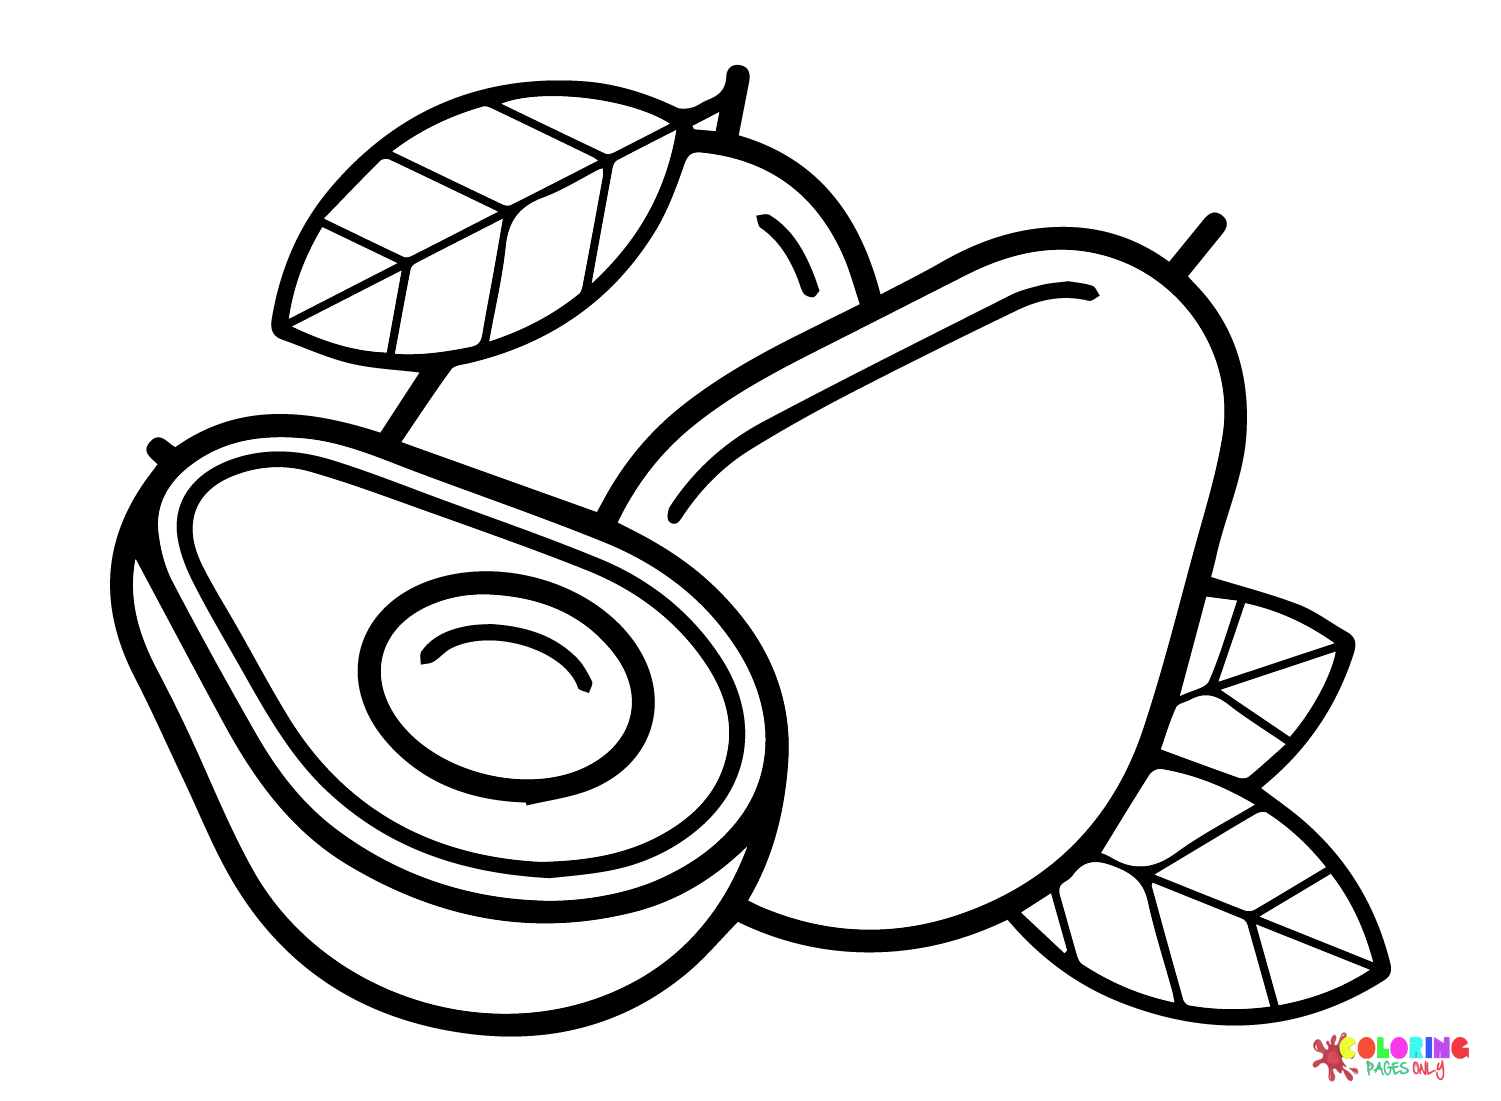 Avocado coloring pages printable for free download